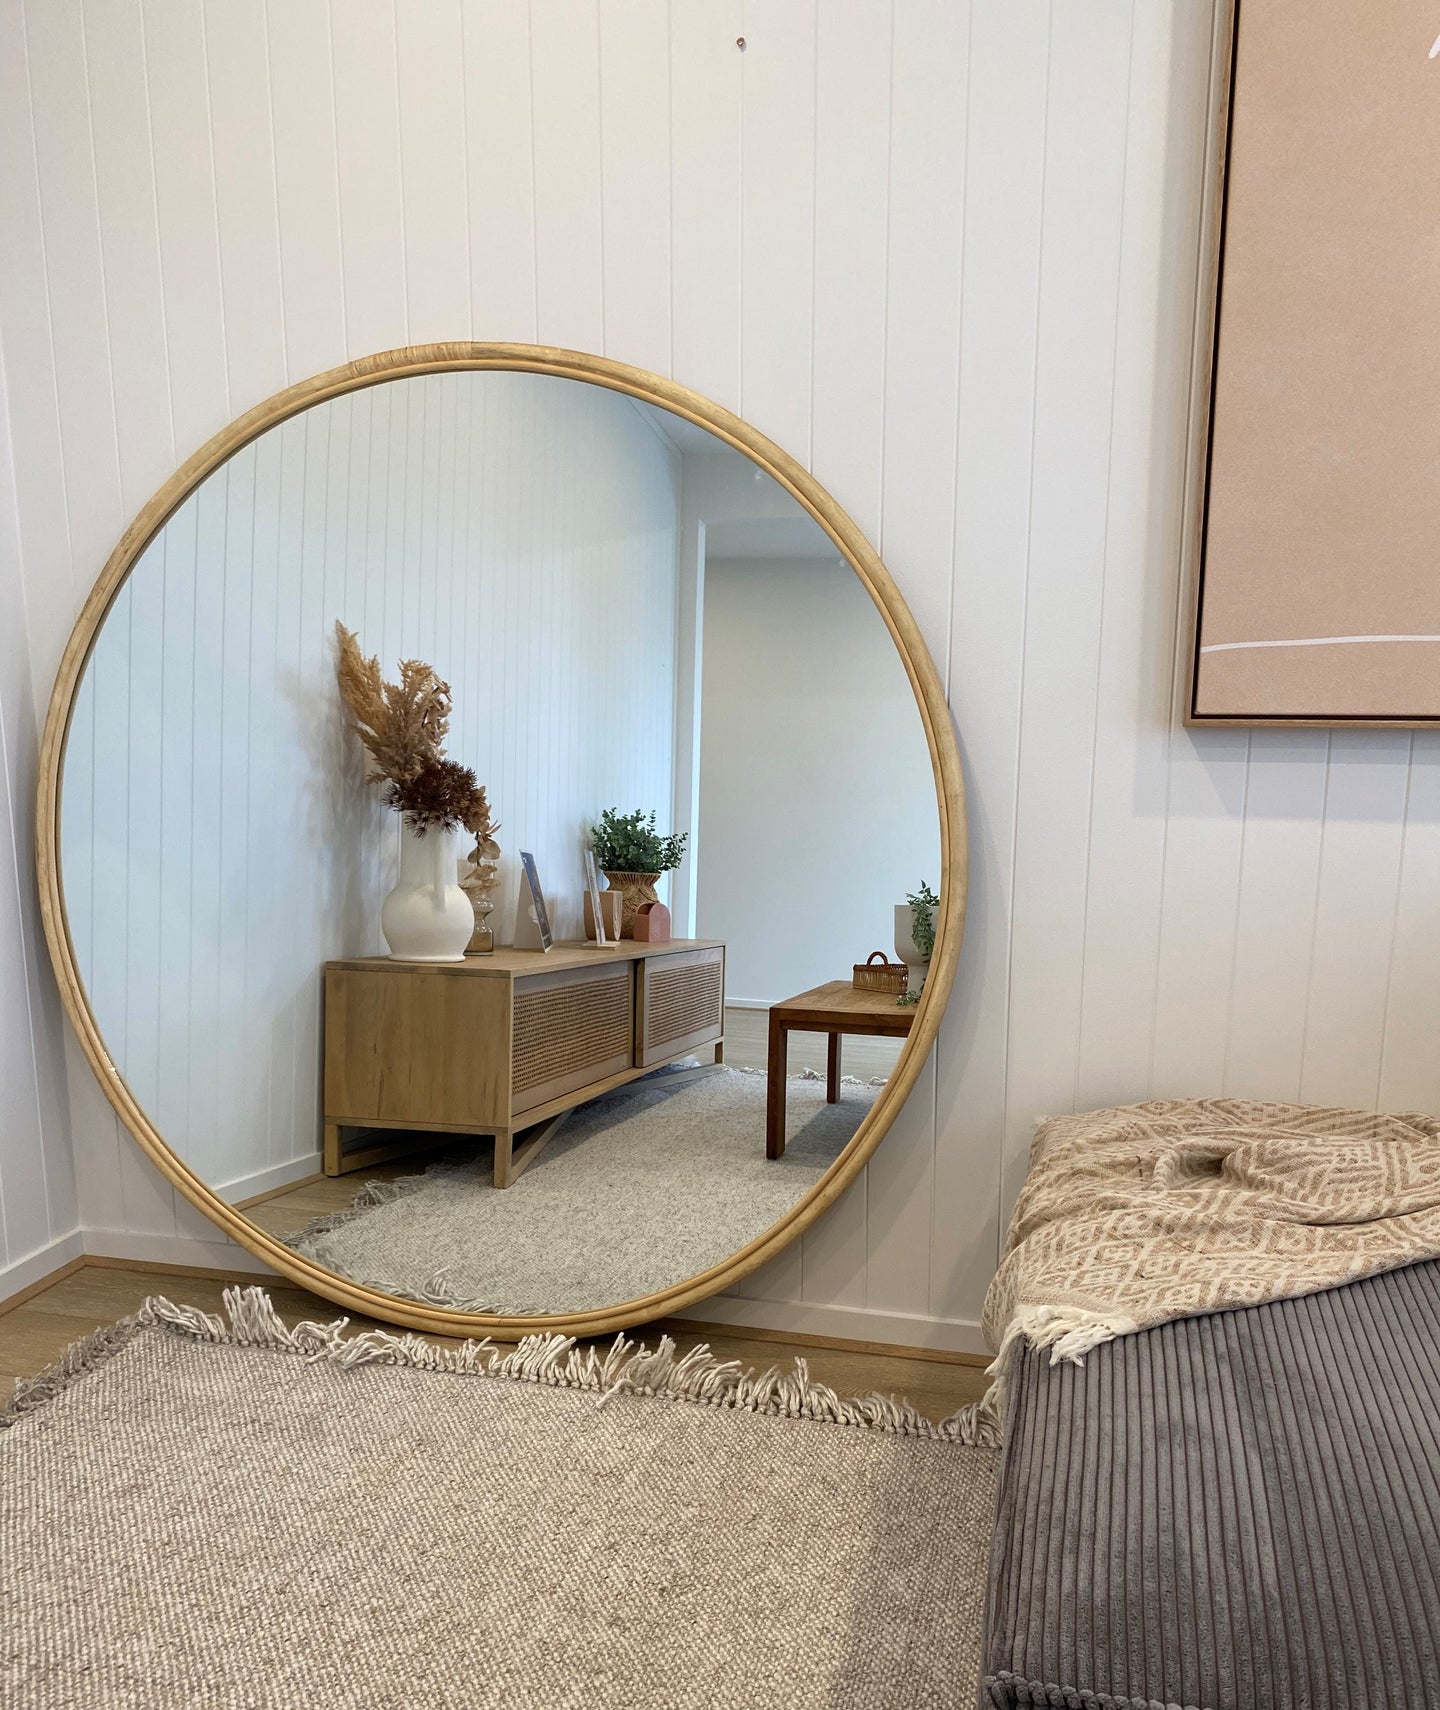 Large circle natural rattan mirror 1500mm in diameter, leaning against a white panelled wall in a newly built home